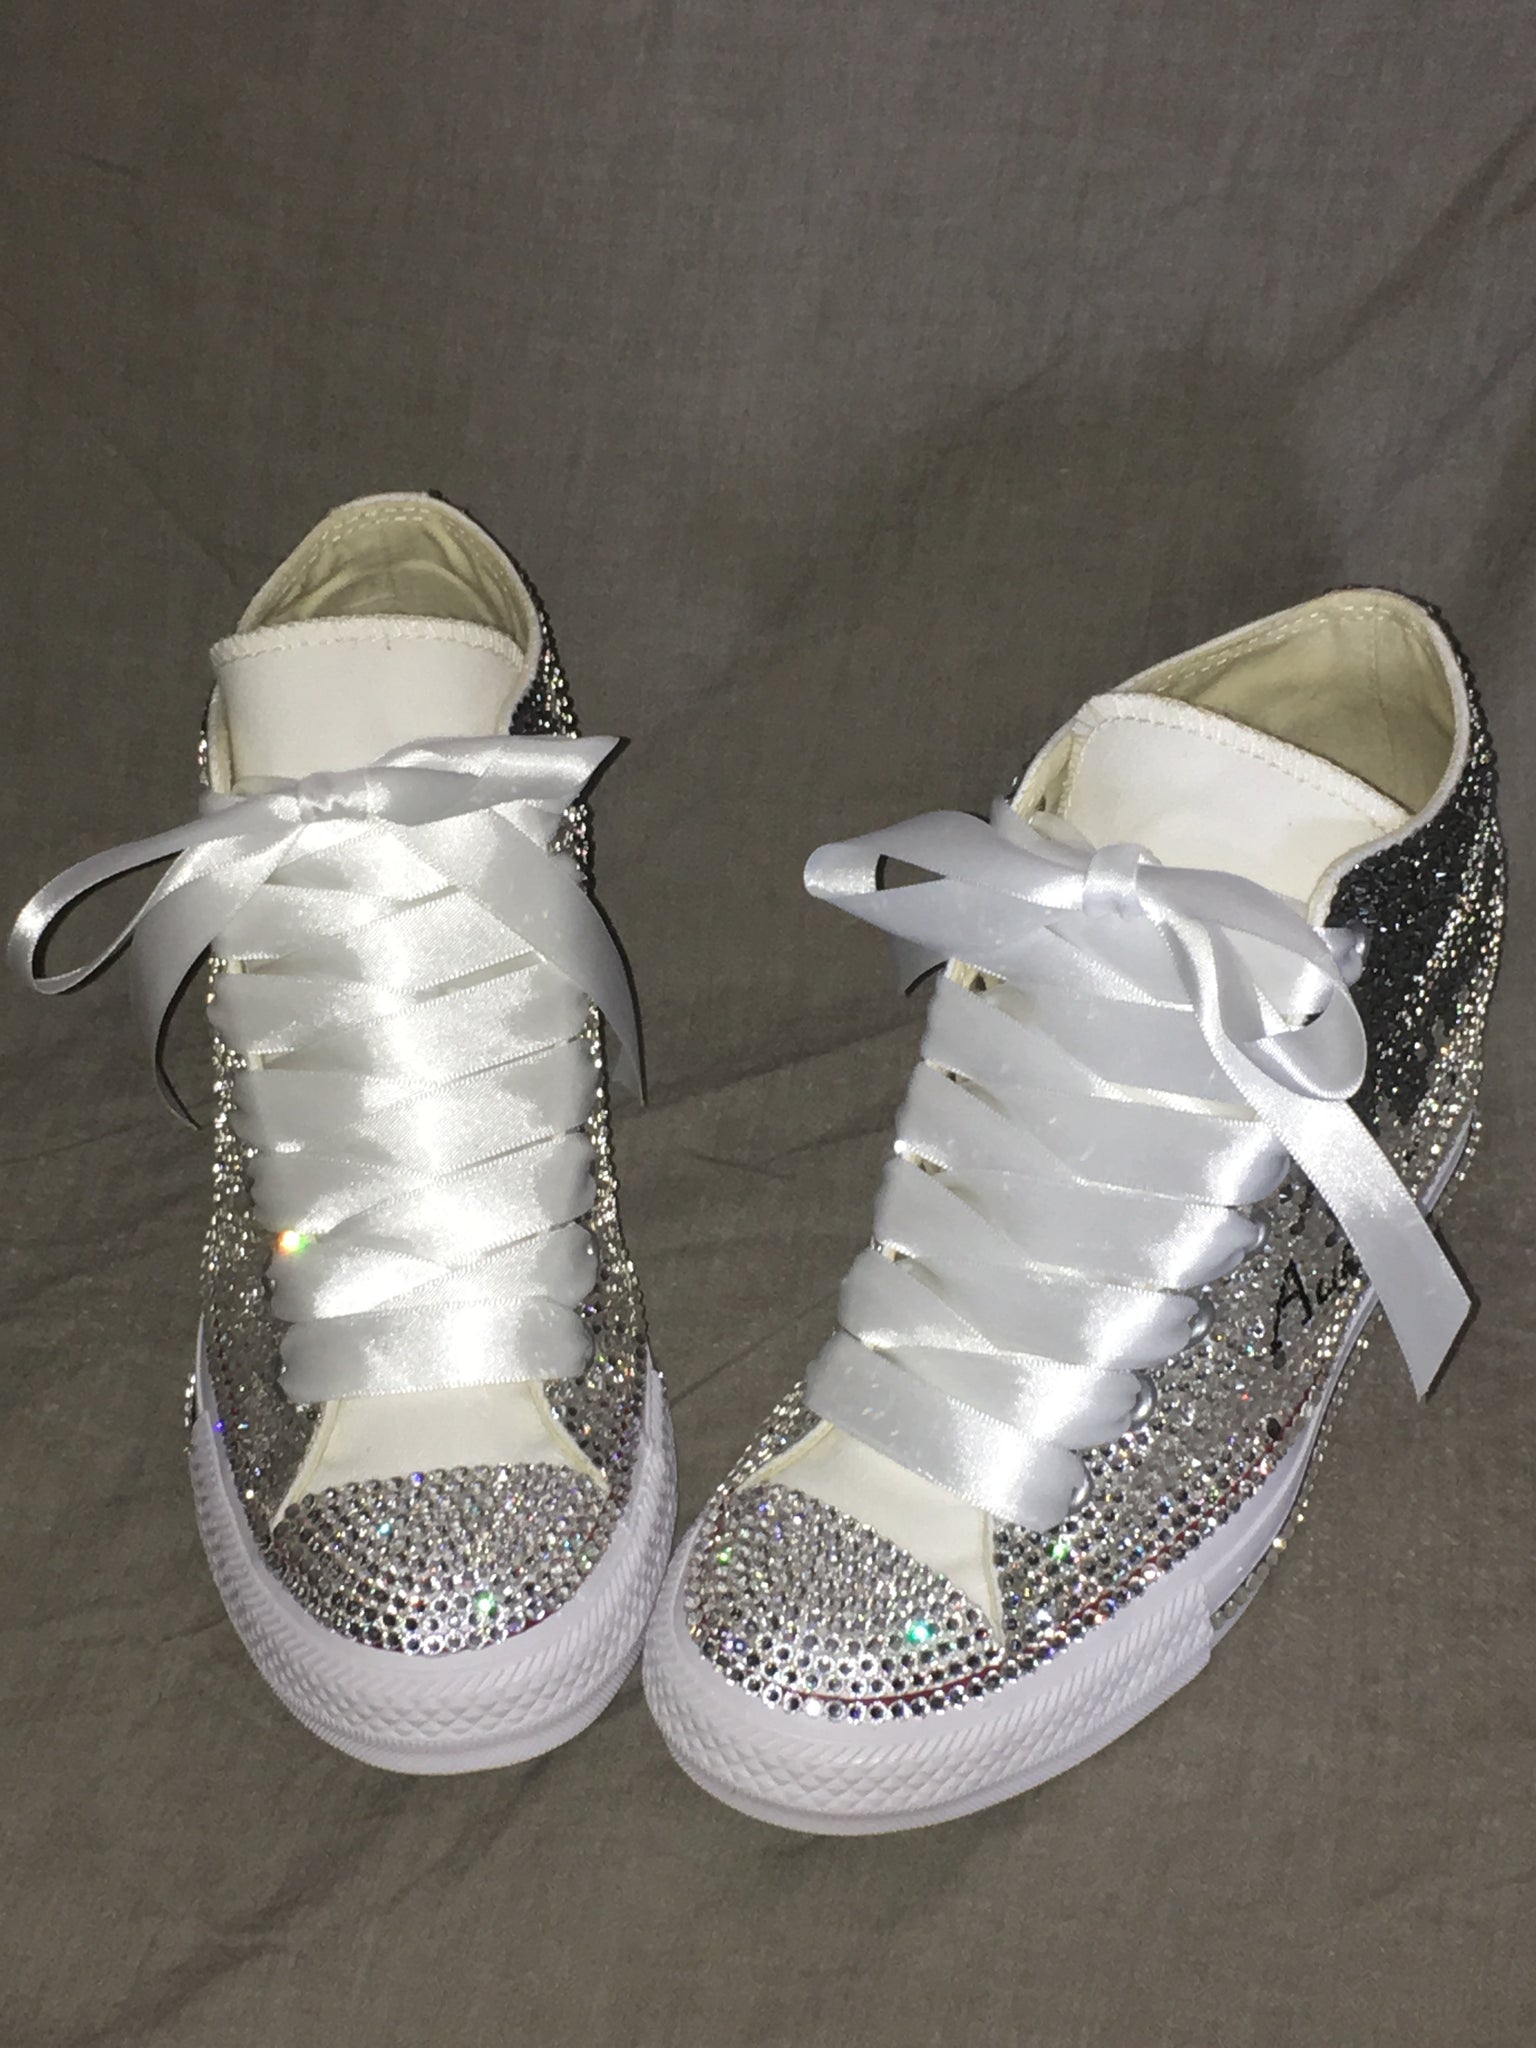 bling converse trainers